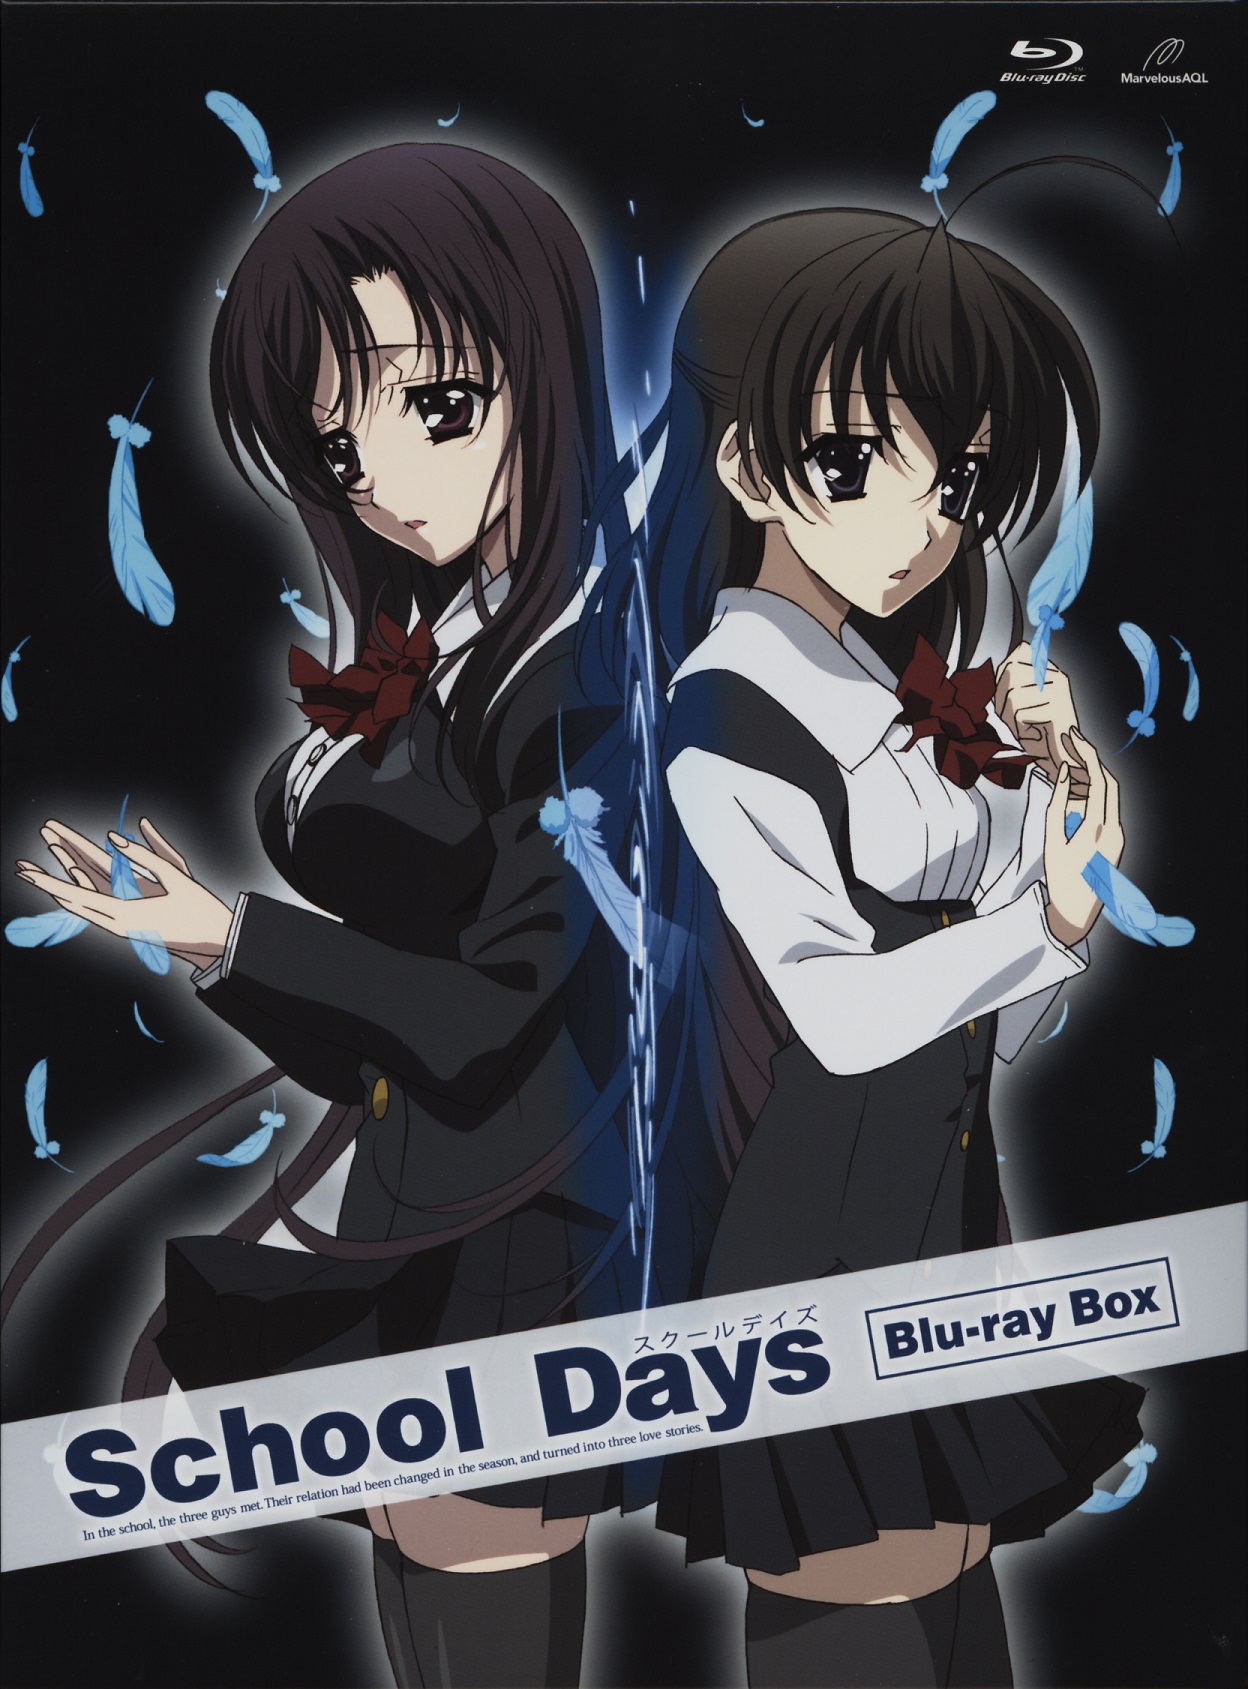 Images of School Days | 1248x1689